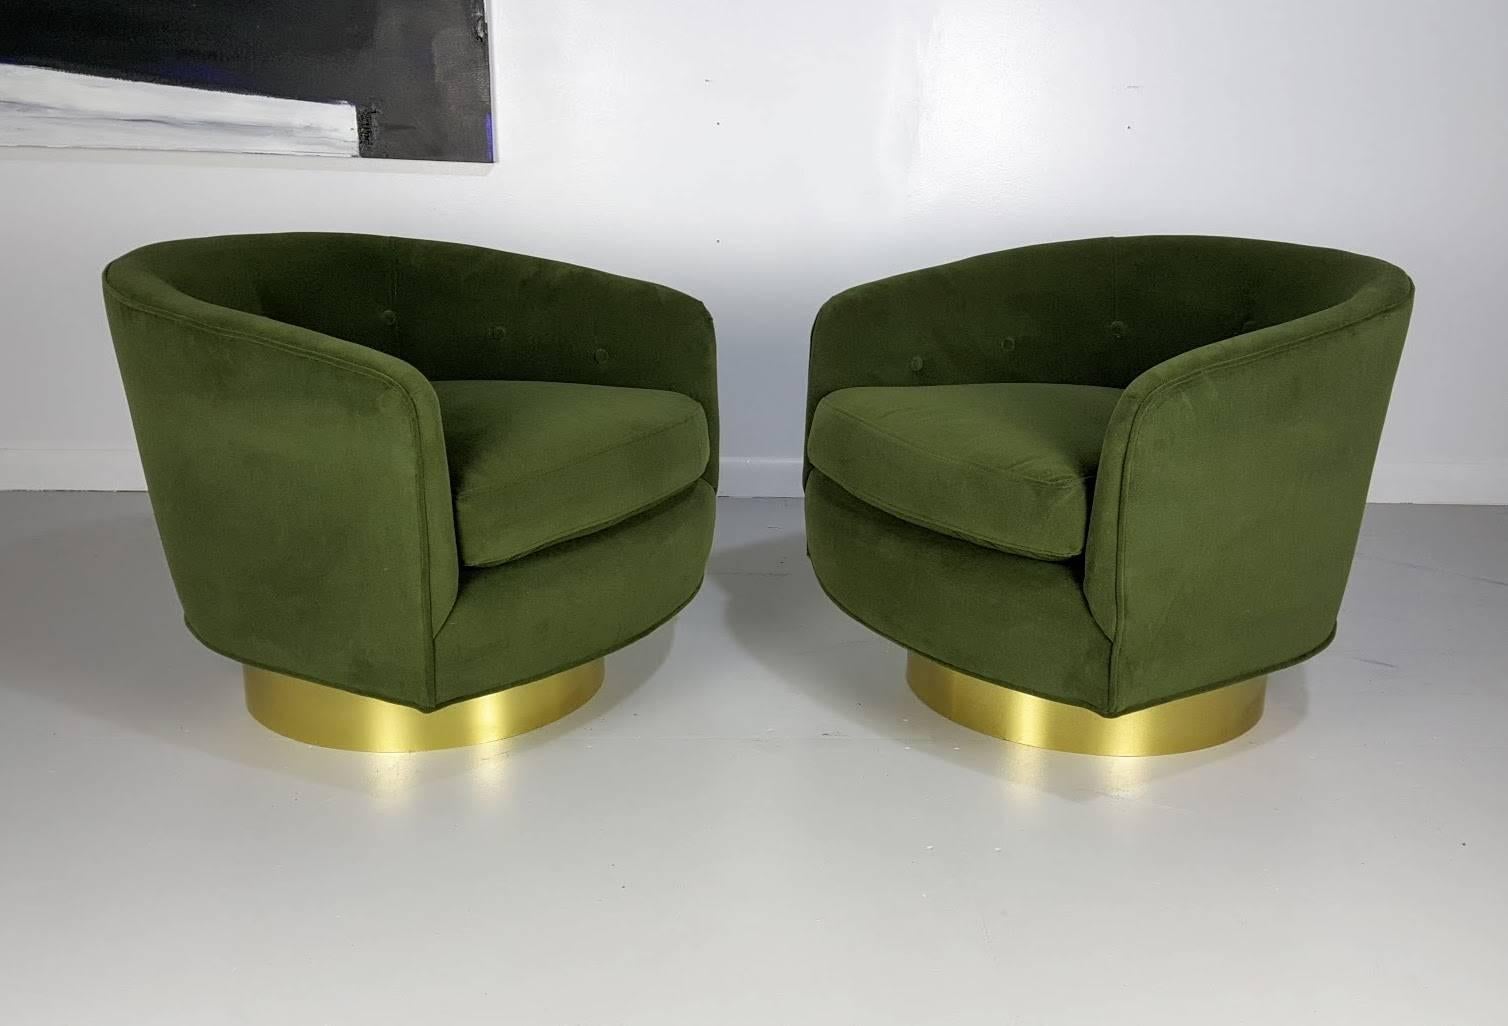 Gorgeous tub chairs in velvet with polished brass bases in the style of Milo Baughman. These chairs are designed and manufactured by Refine Limited. Very comfortable and have swivel mechanism. Materials and quality are exceptional. Upholstered in a